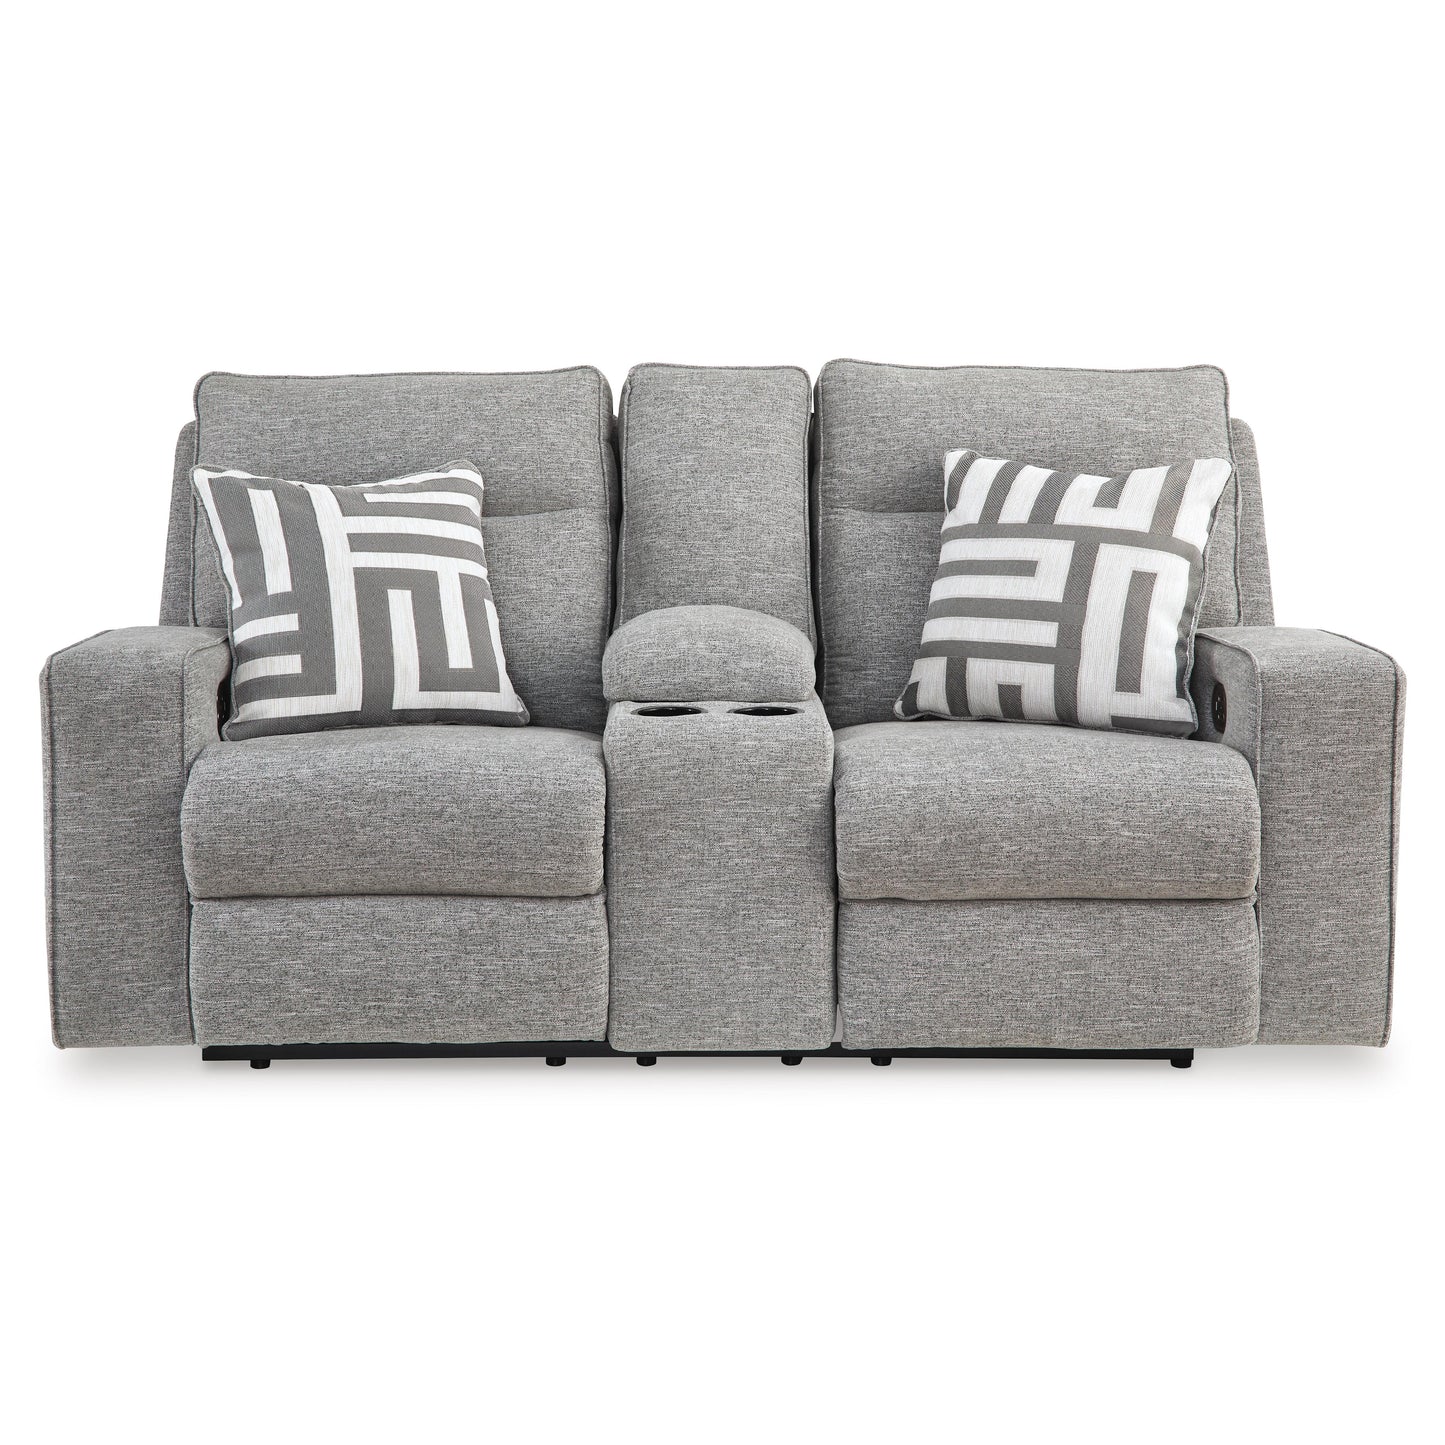 Signature Design by Ashley Biscoe Fabric Loveseat 9050318 IMAGE 3